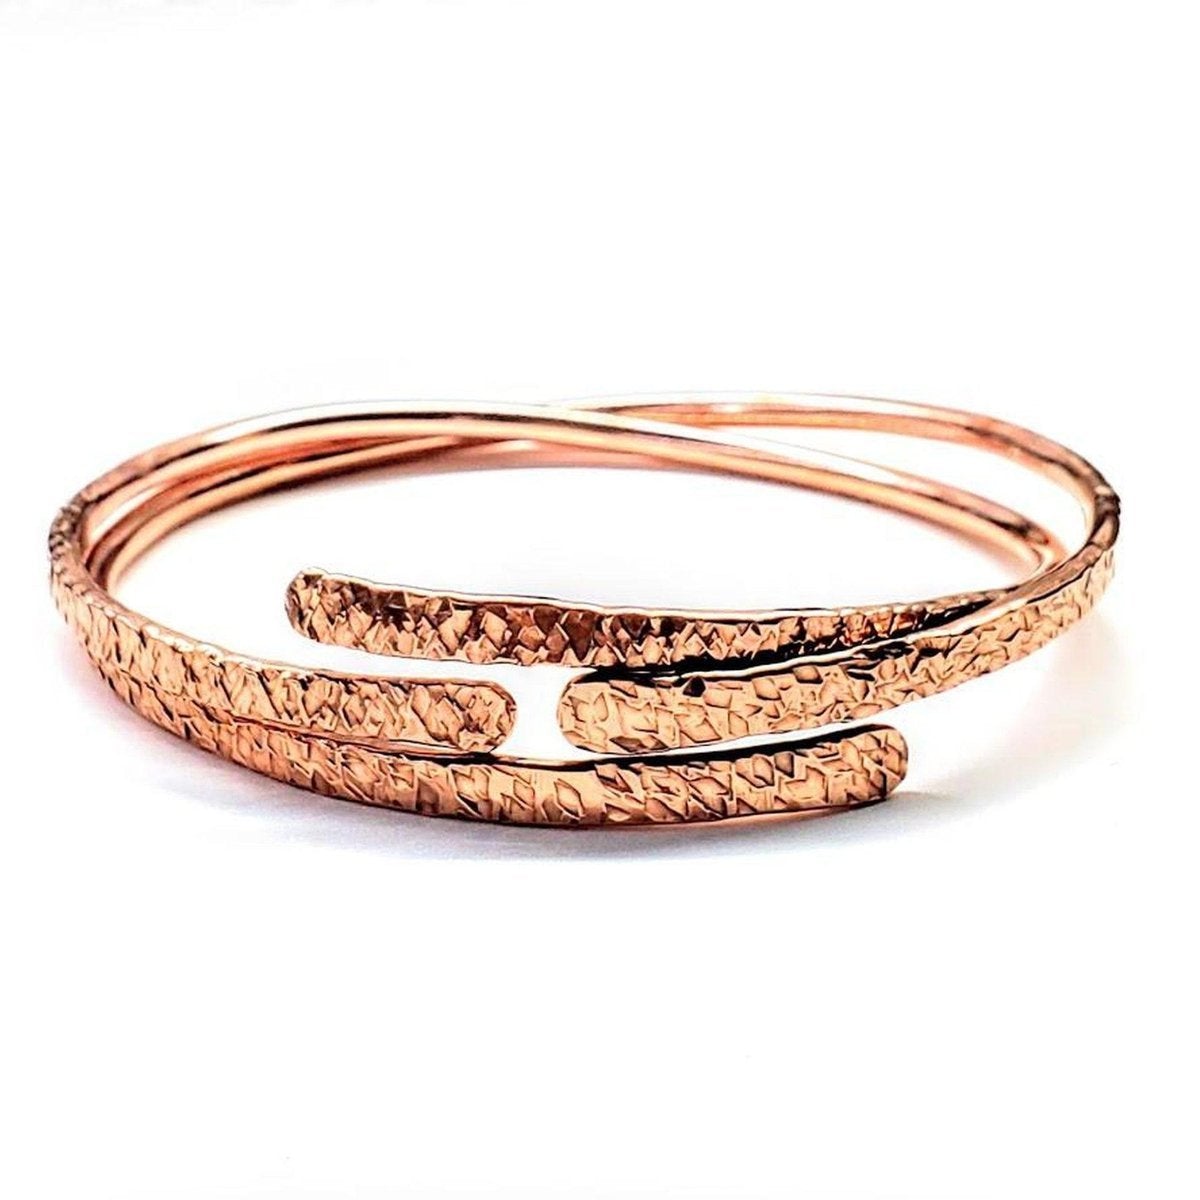 Adjustable Hammered Copper Overlap Bangle For Him or Her - KME means the very best